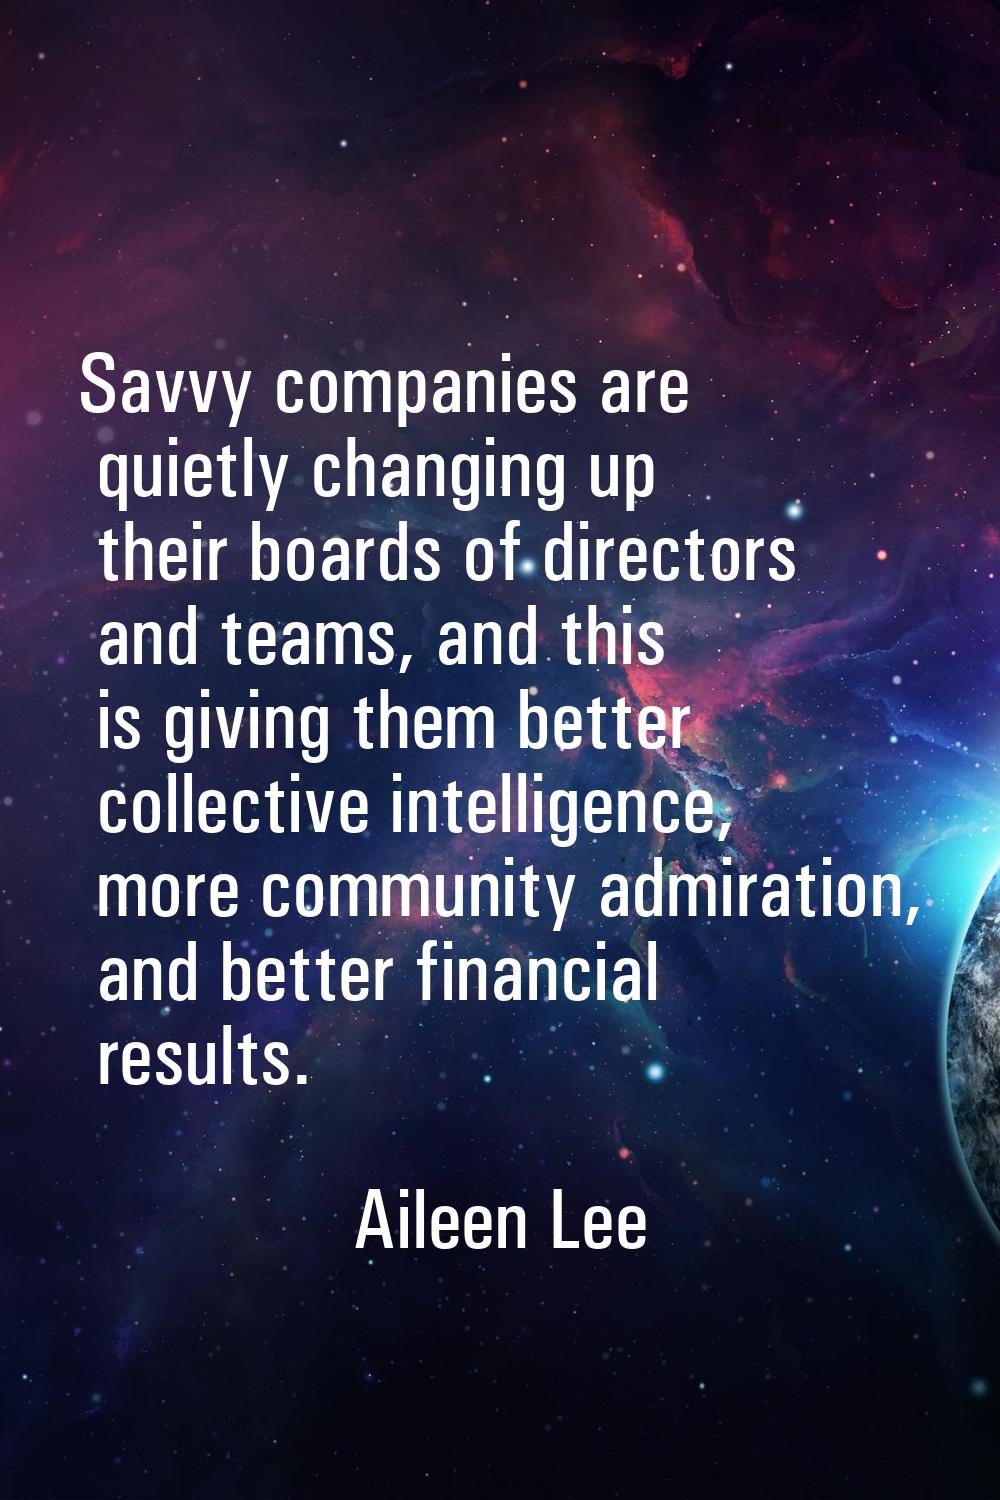 Savvy companies are quietly changing up their boards of directors and teams, and this is giving the